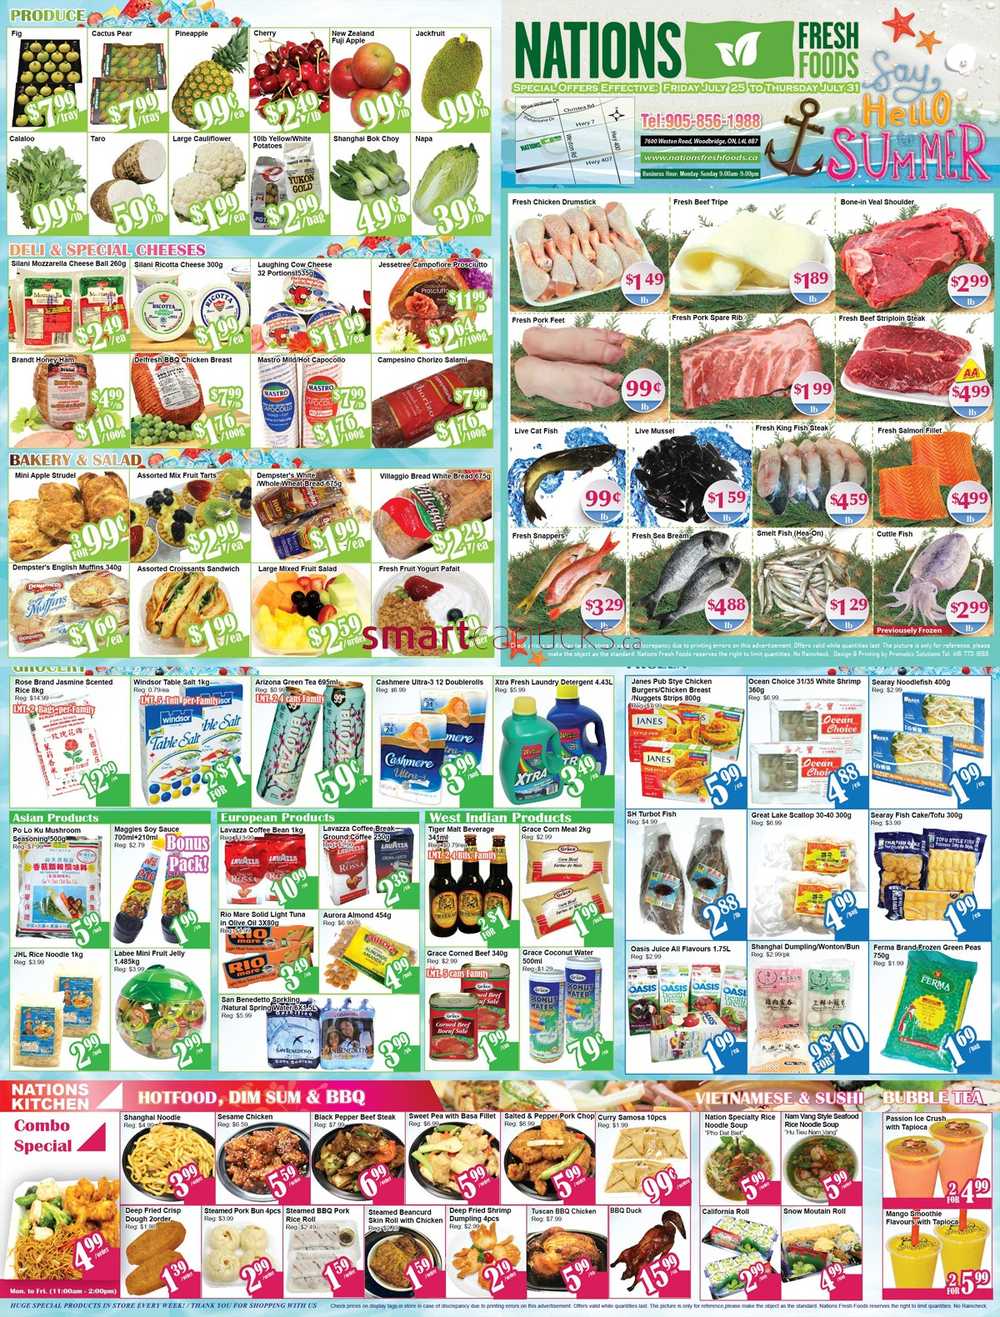 Nations Fresh Foods Flyer (Vaughan) July 25 to July 31